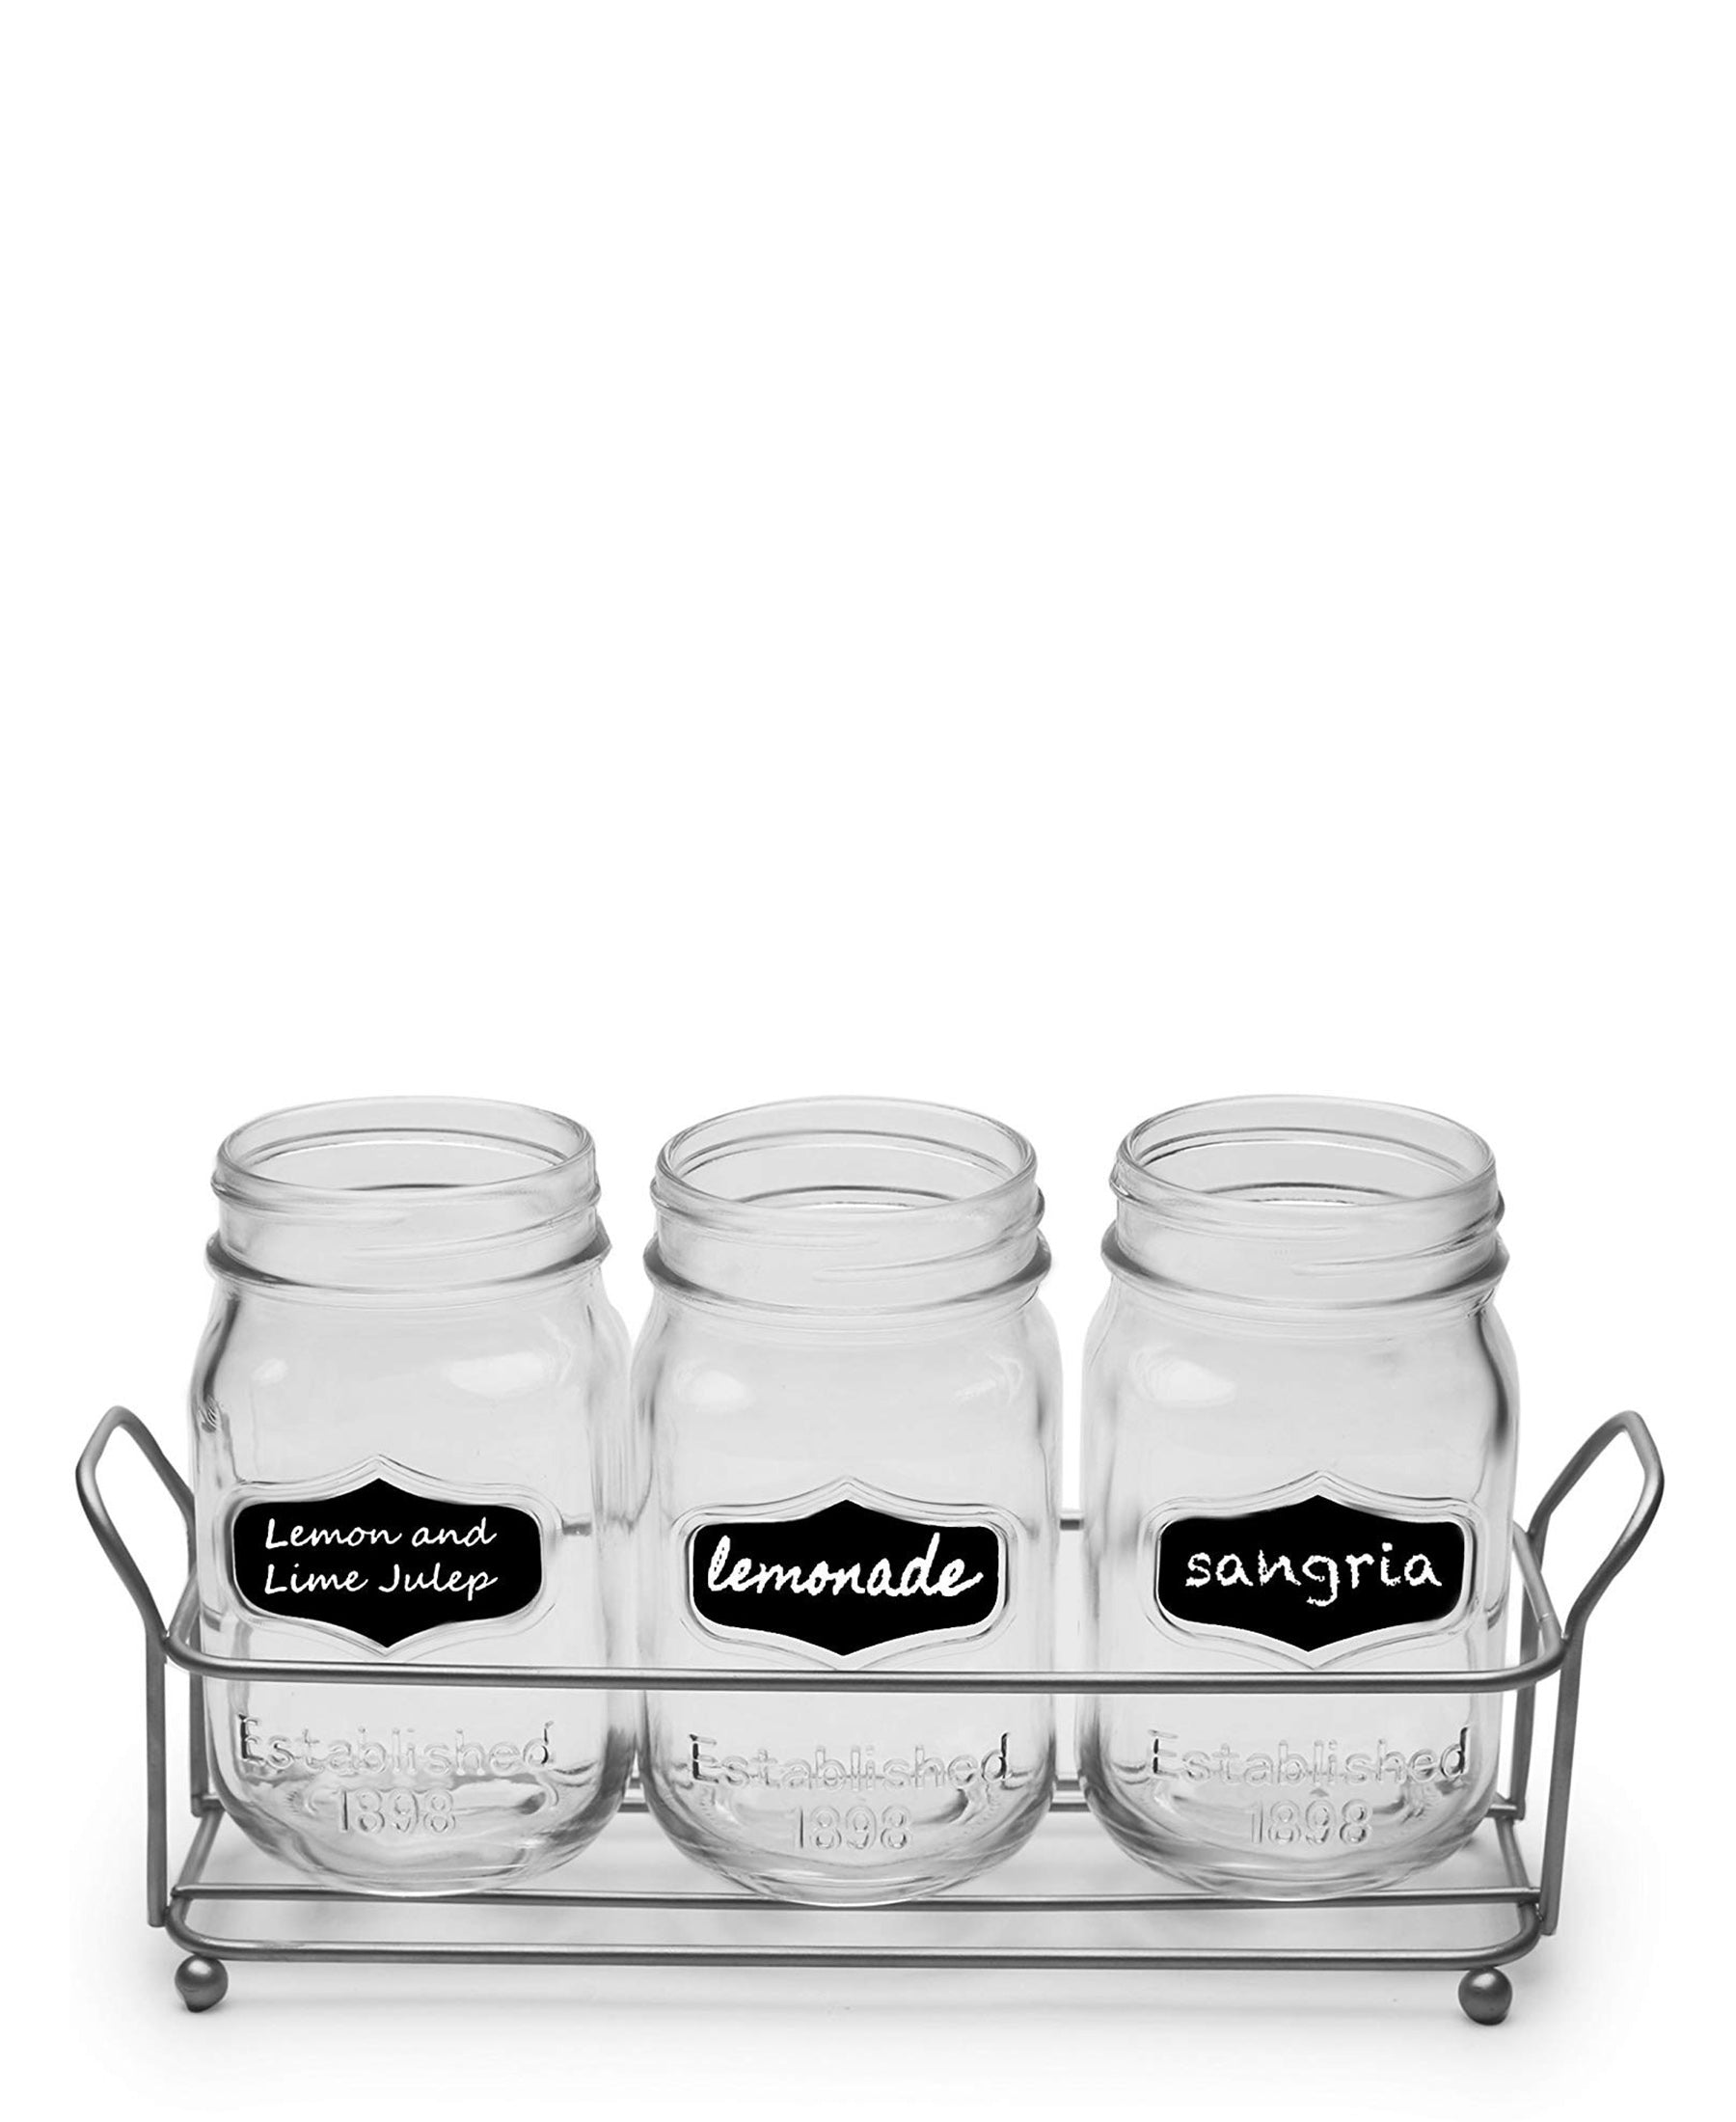 Circleware Chalkboard Mason Jar Glasses with Metal Holder Stand Set of 4 - Clear